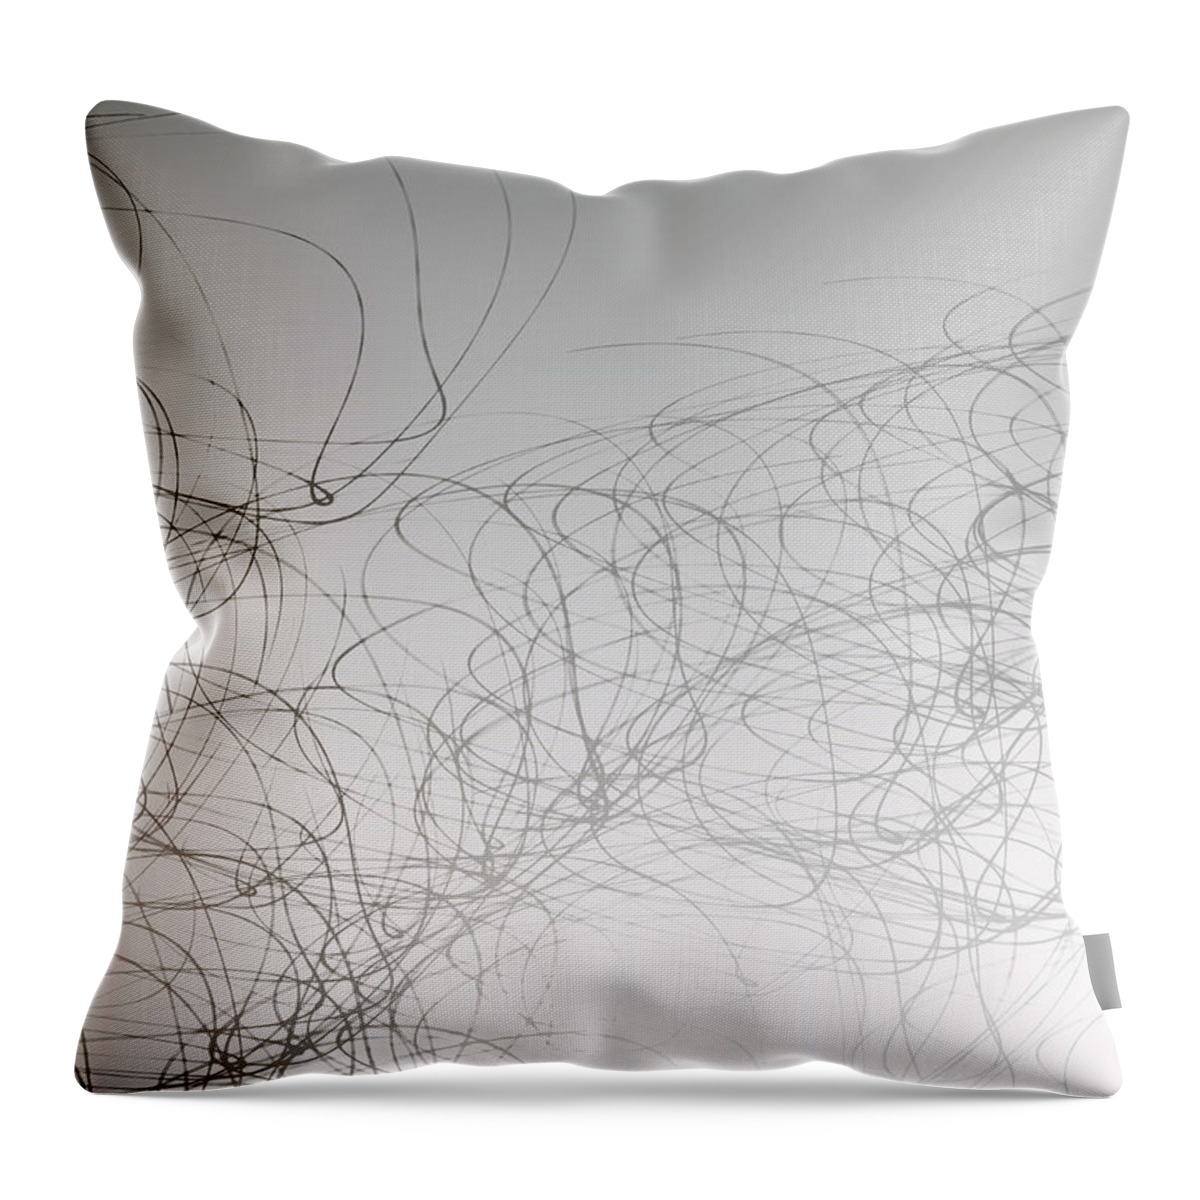 Glorious Throw Pillow featuring the drawing Img_3 by John Emmett